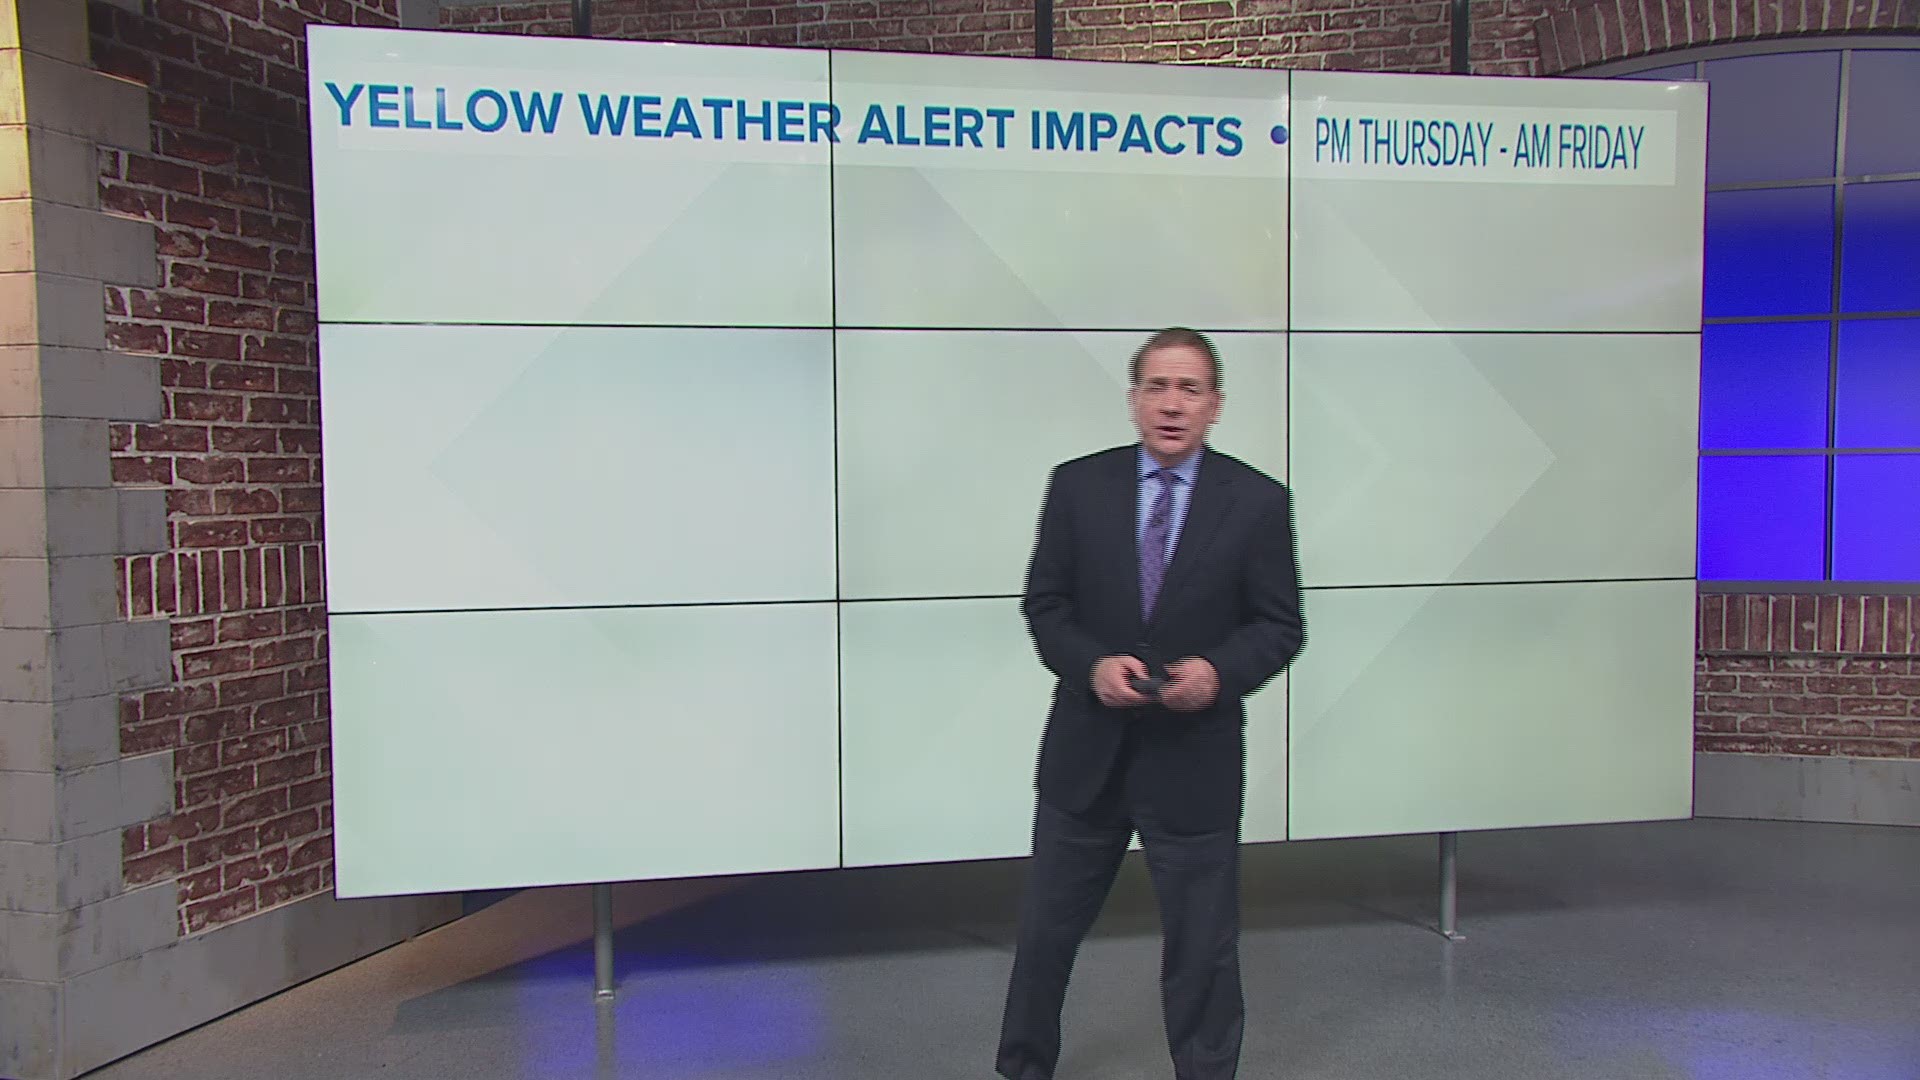 Meteorologist Topper Shutt has your latest weather forecast.